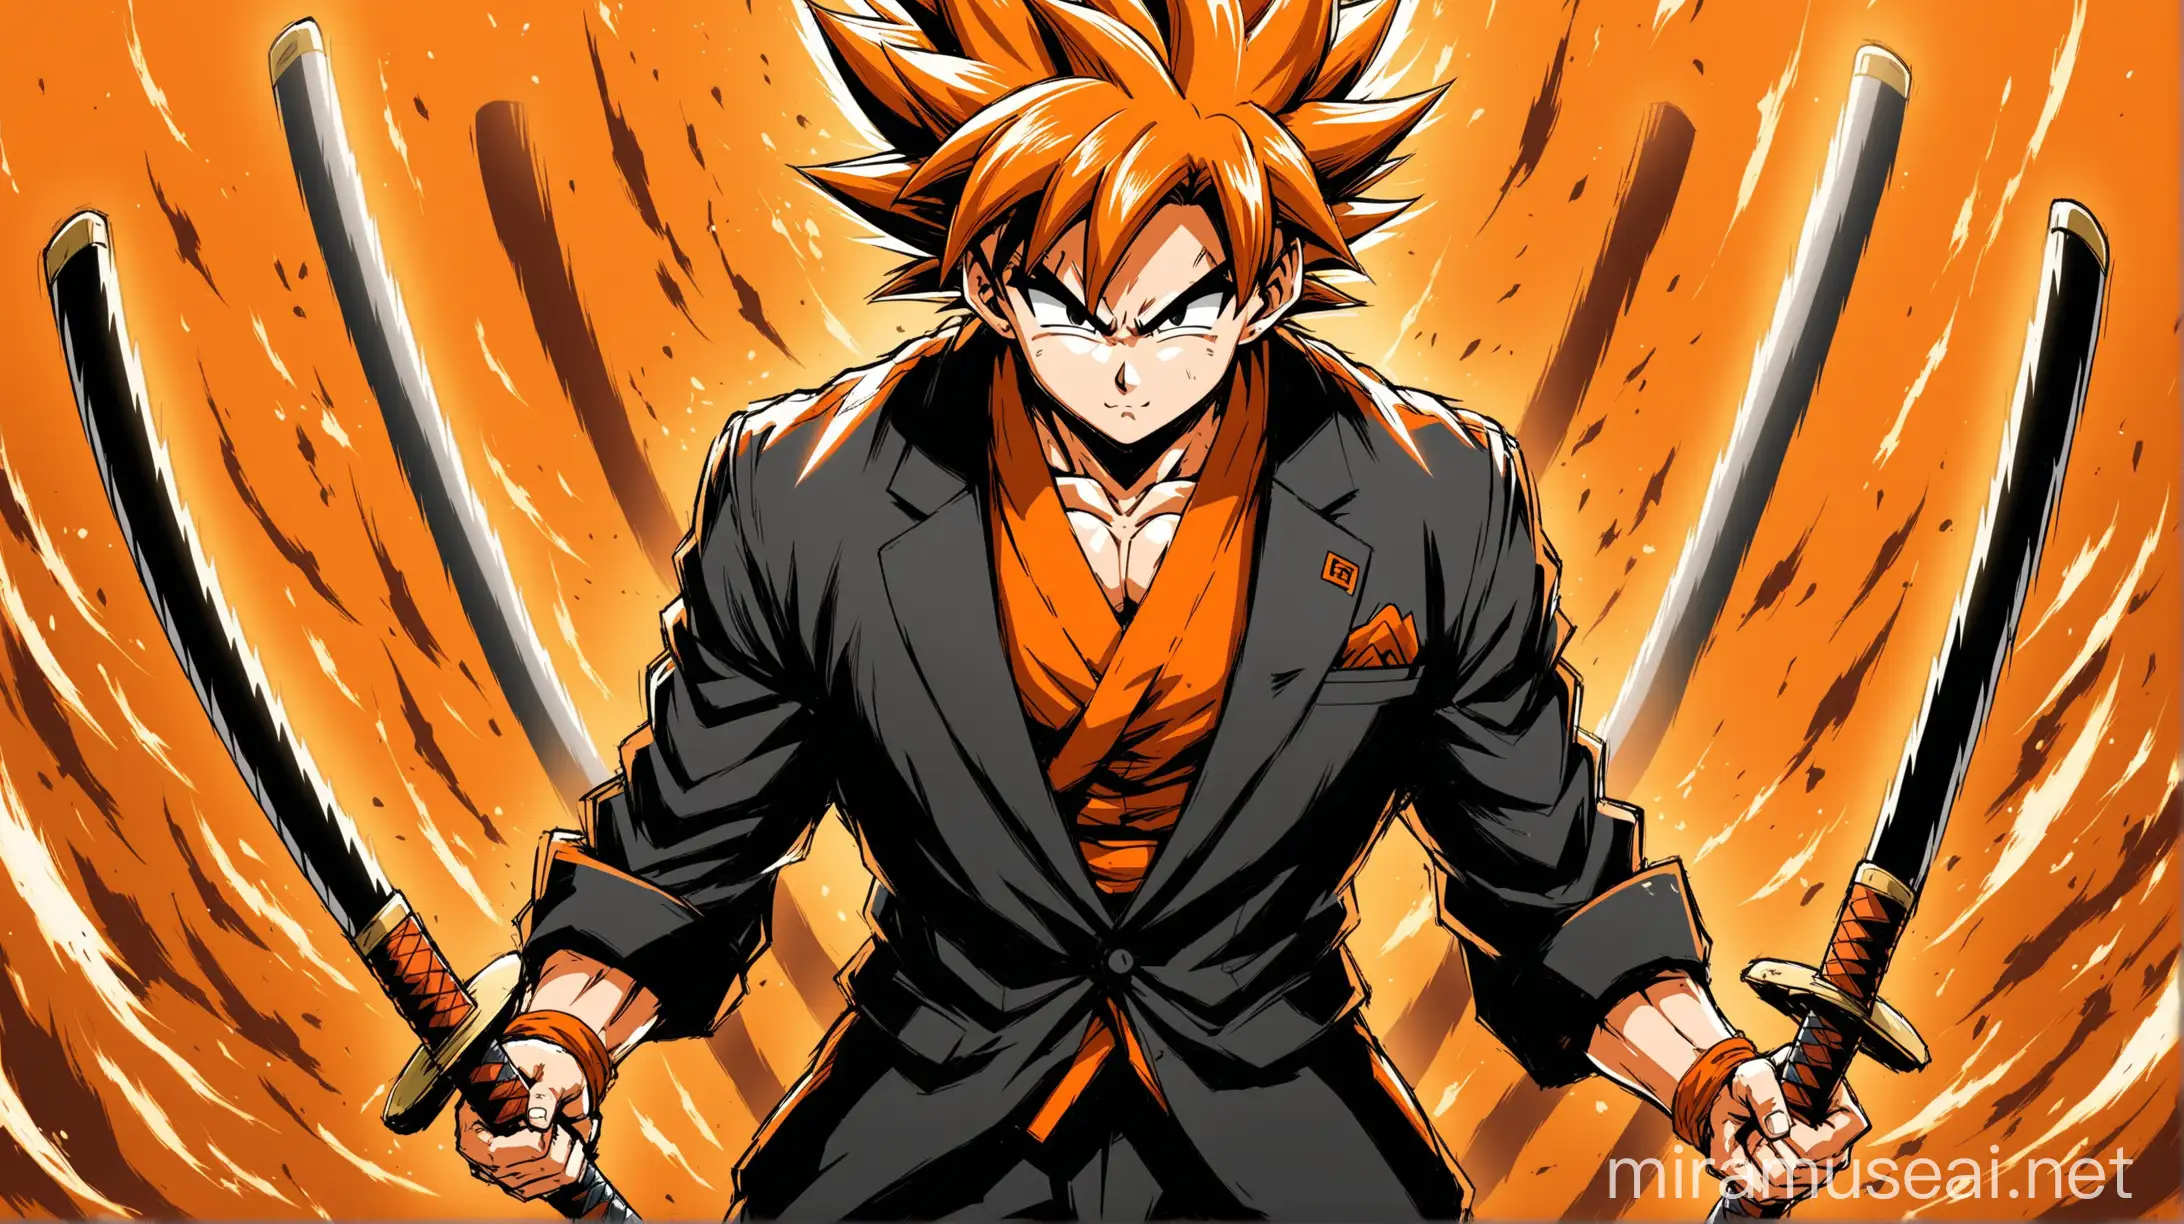 goku with orange haircut holding 2 katanas in a stylish fashion, orange-black theme, there are no colors besides orange and black, there is more black than orange, there are orange slashes behind goku, goku also wears a business suit